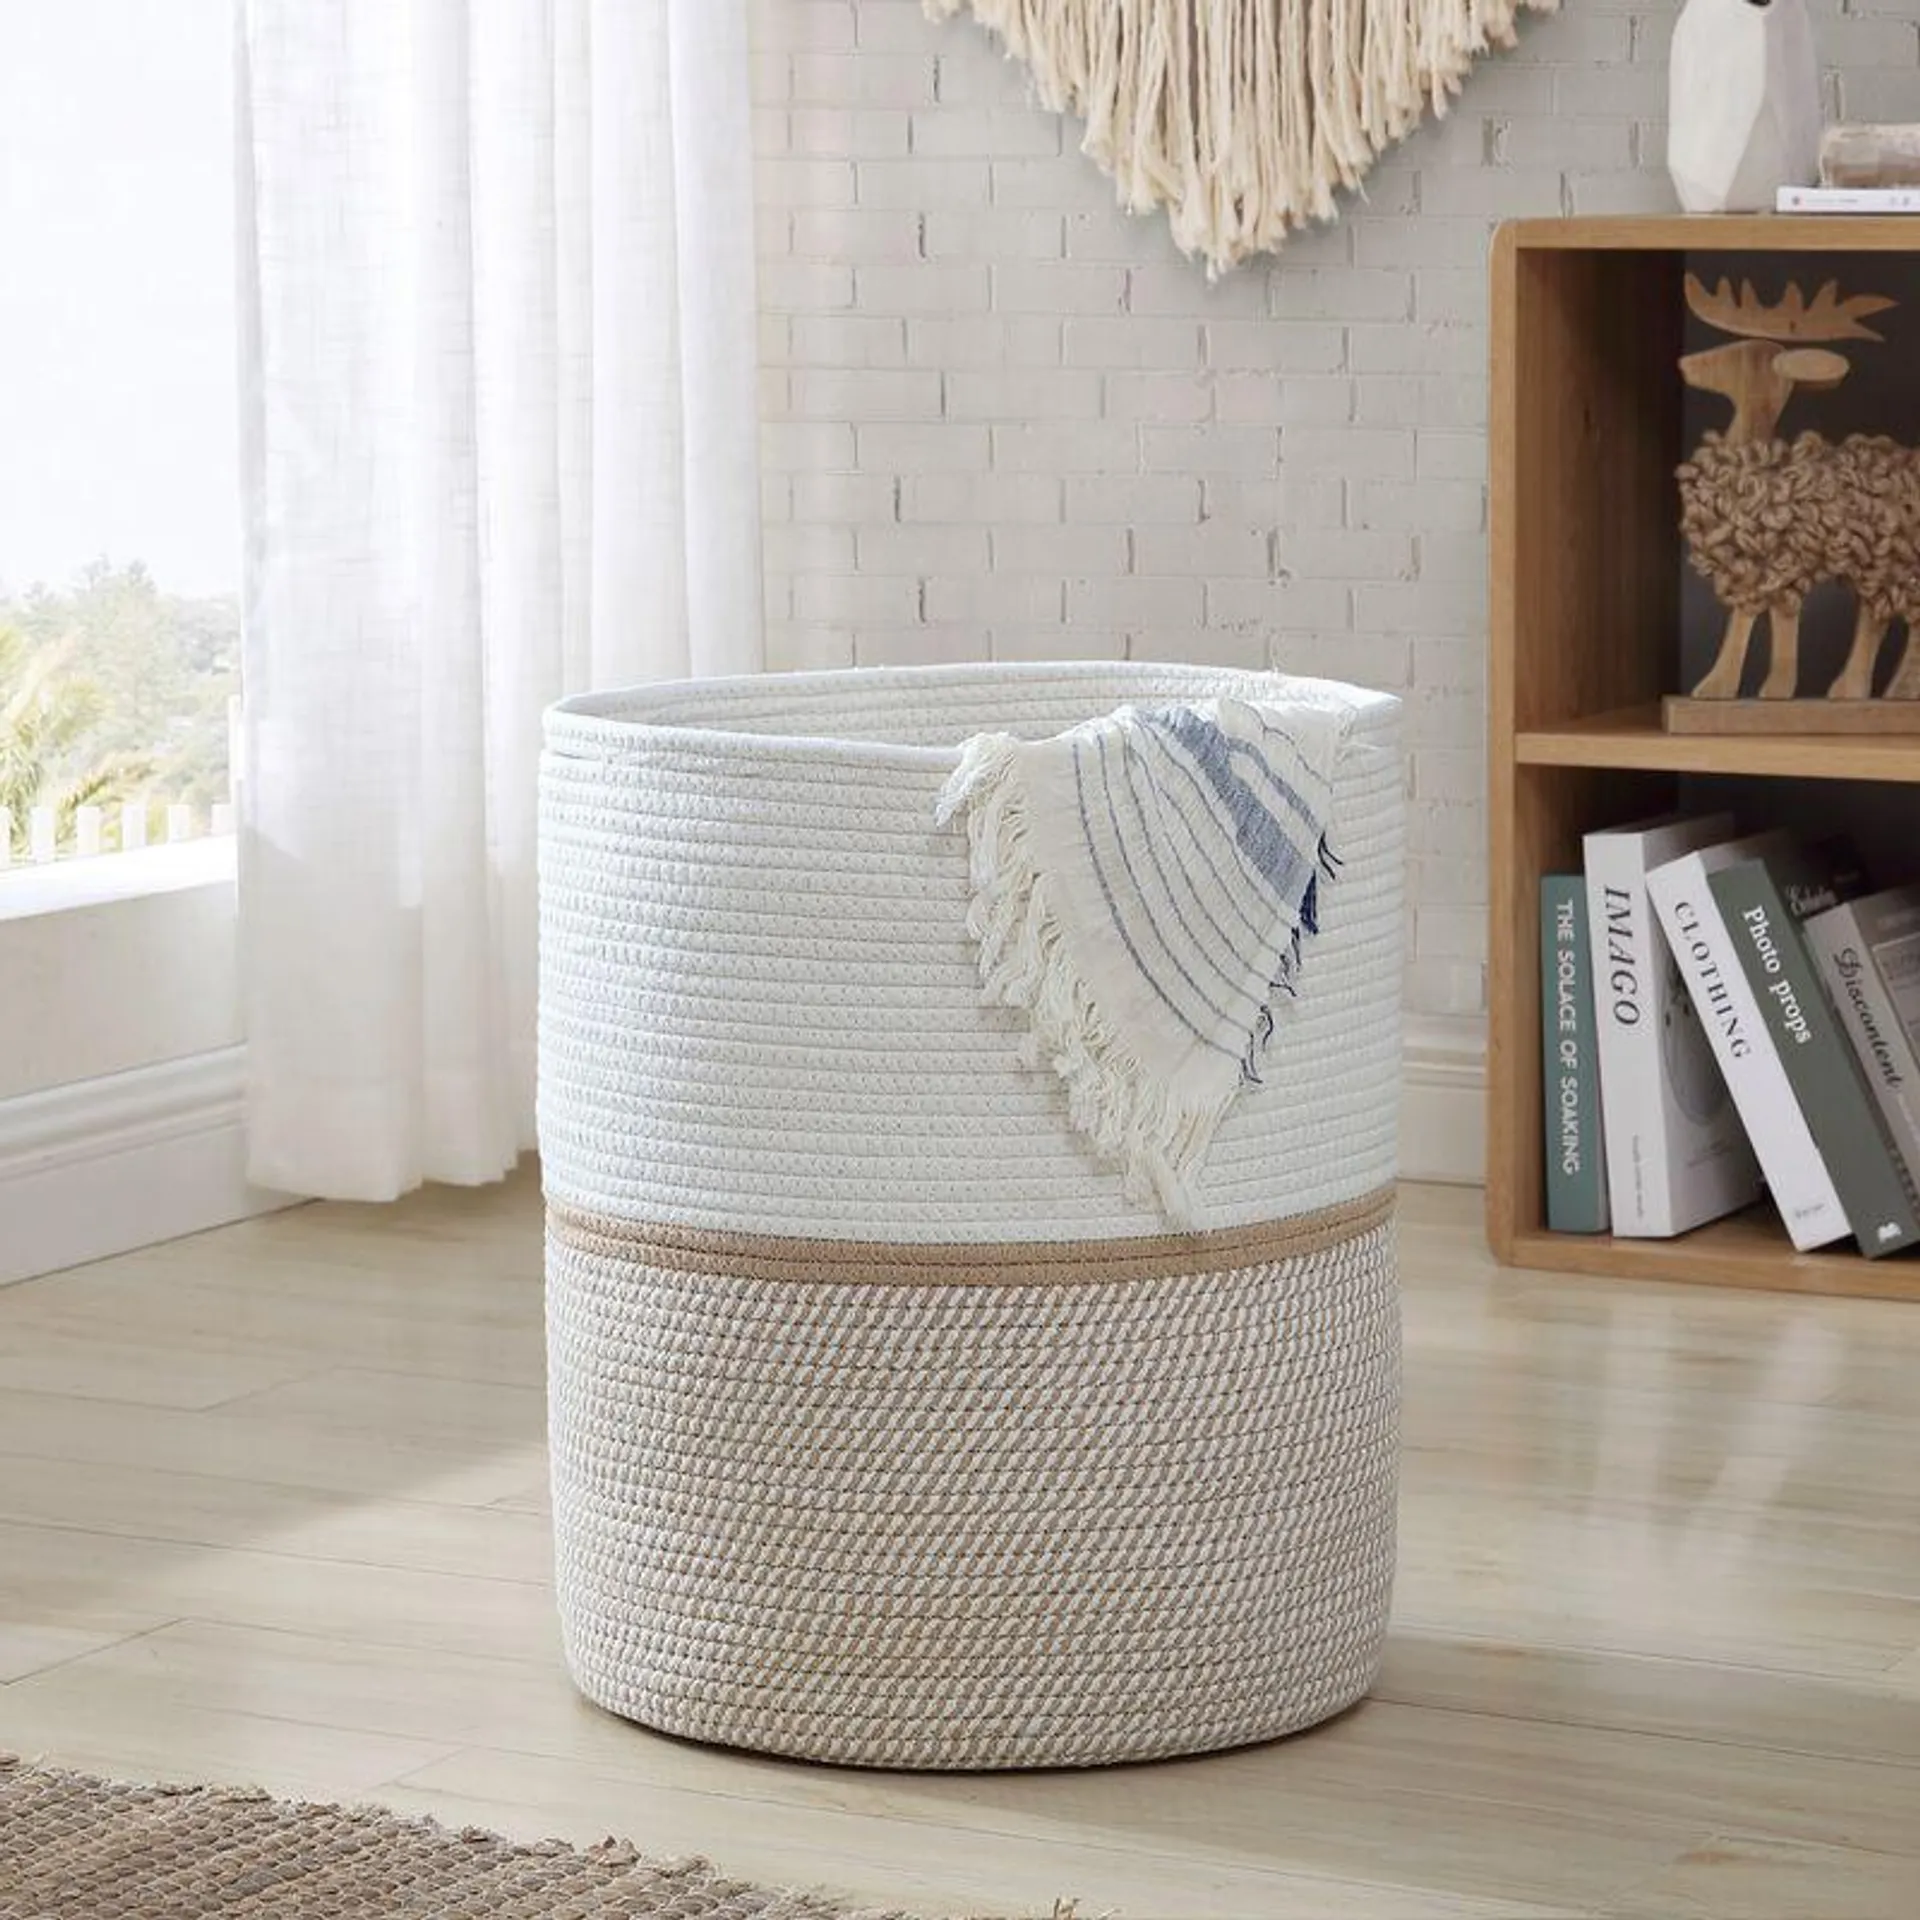 Large Cotton Rope Laundry Hamper Woven Basket with Handles